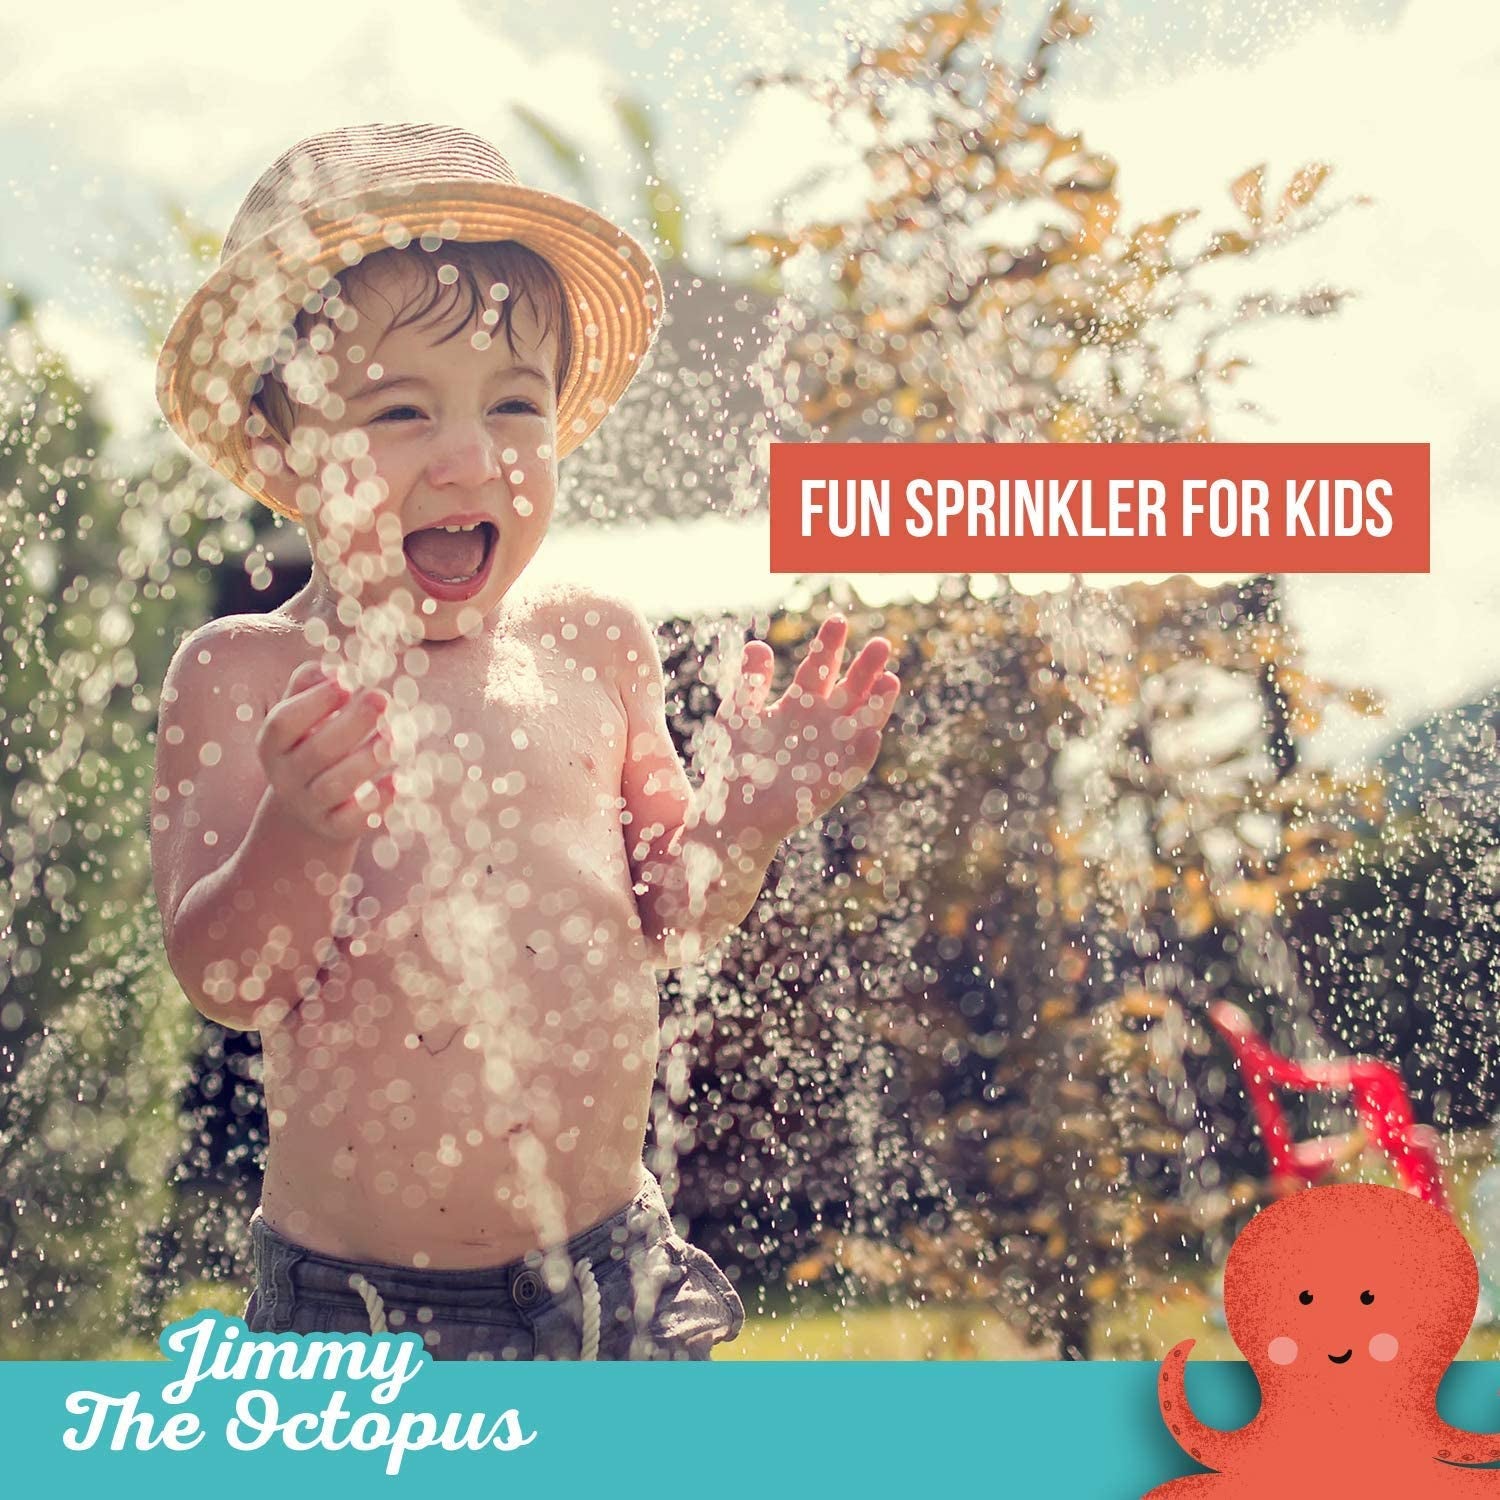 Outdoor Water Sprinkler Spray for Kids - Cute Backyard Sprinkler Toy with Wiggle Tube Arms - Active Summer Play for Children and Pets - Attaches to Garden Hose - Age 3+